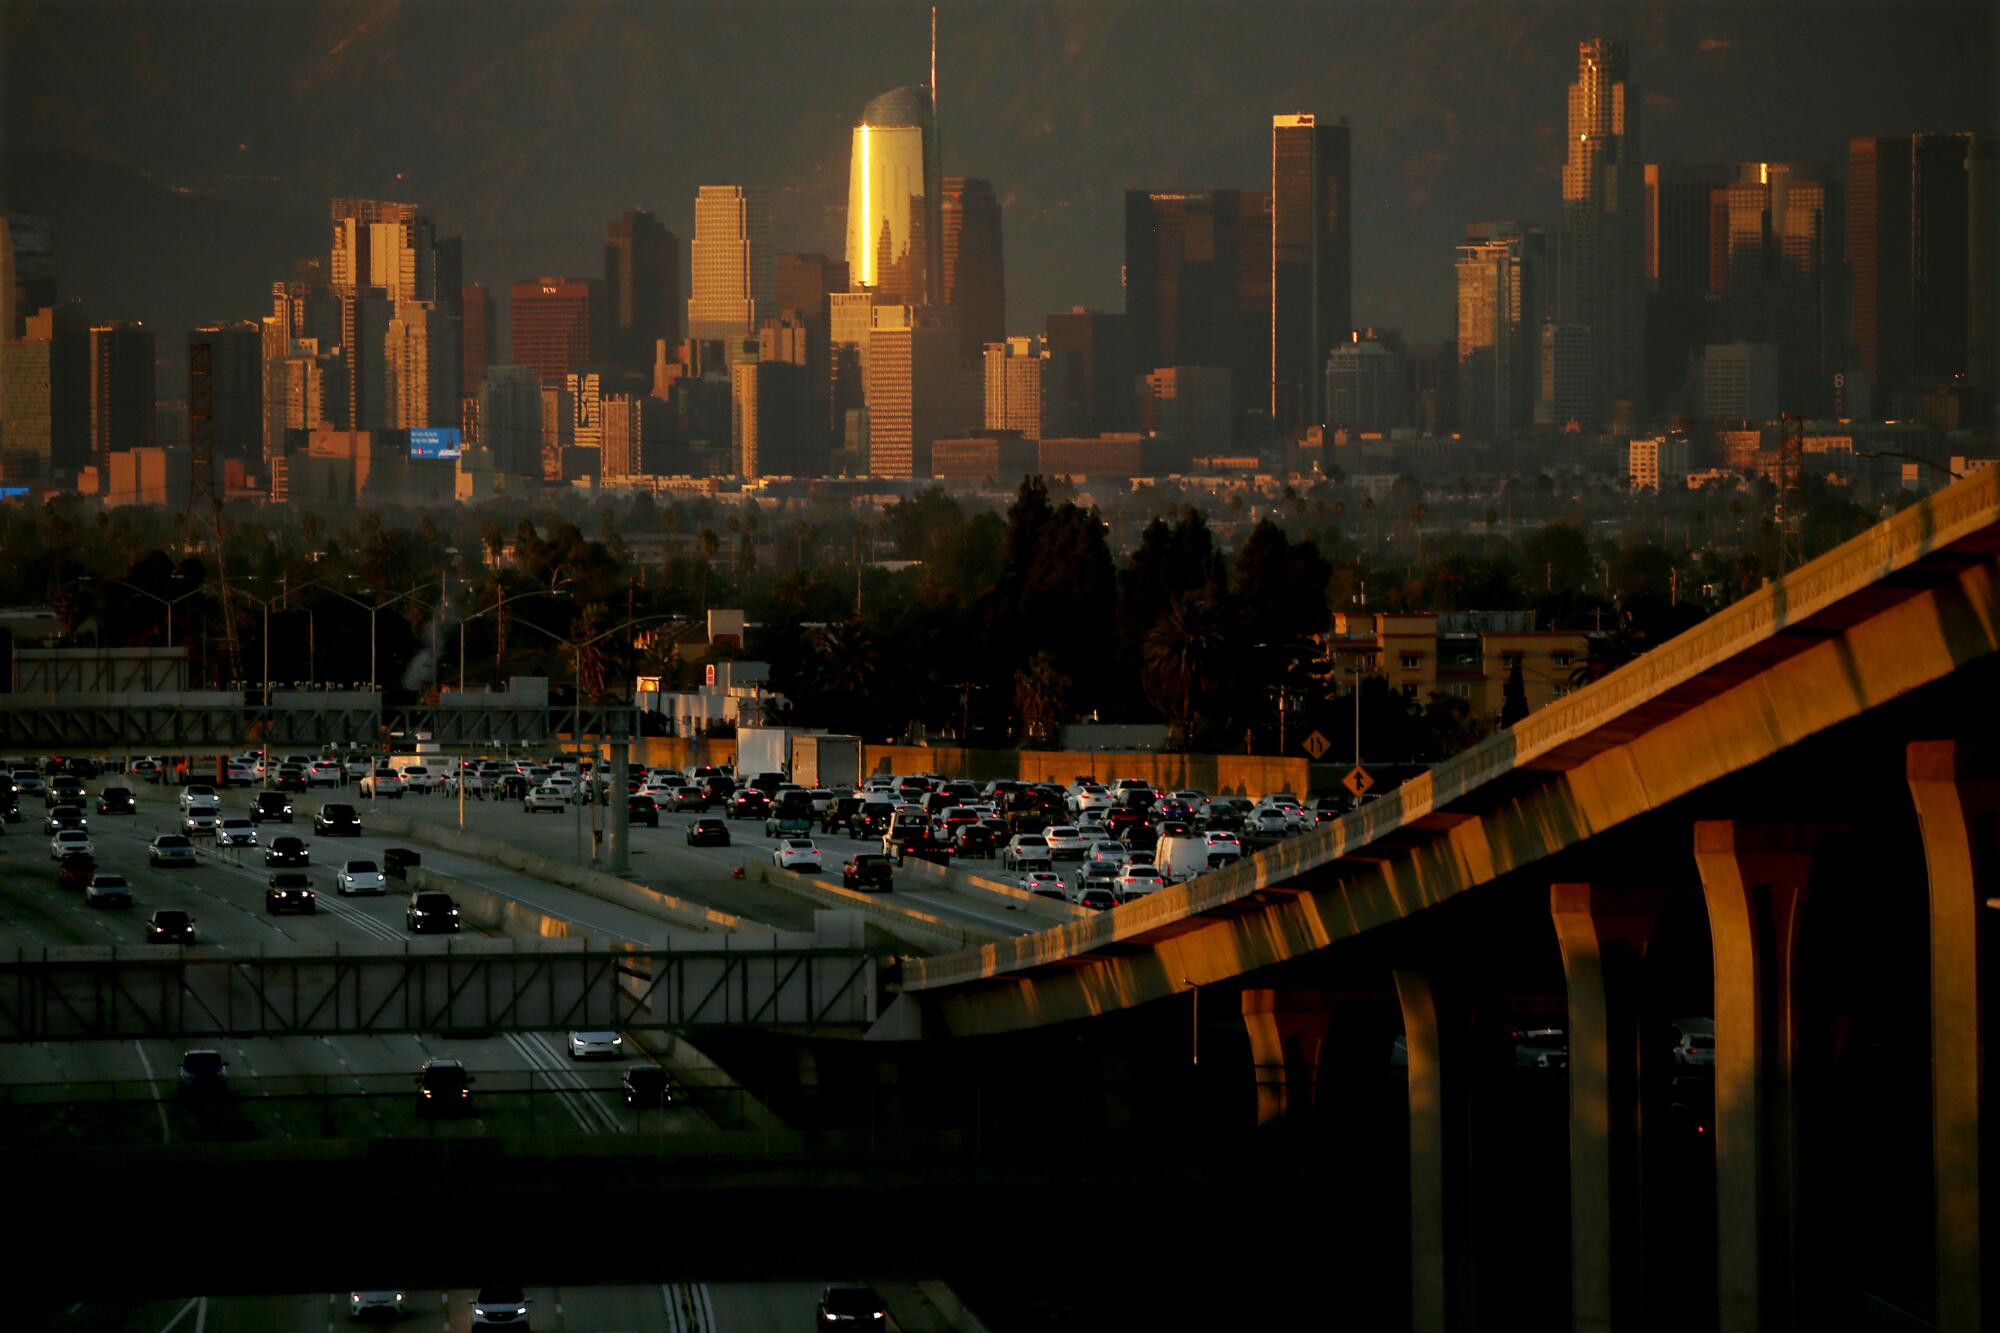 Smog hangs in the air as the sun sets on the downtown Los Angeles skyline.